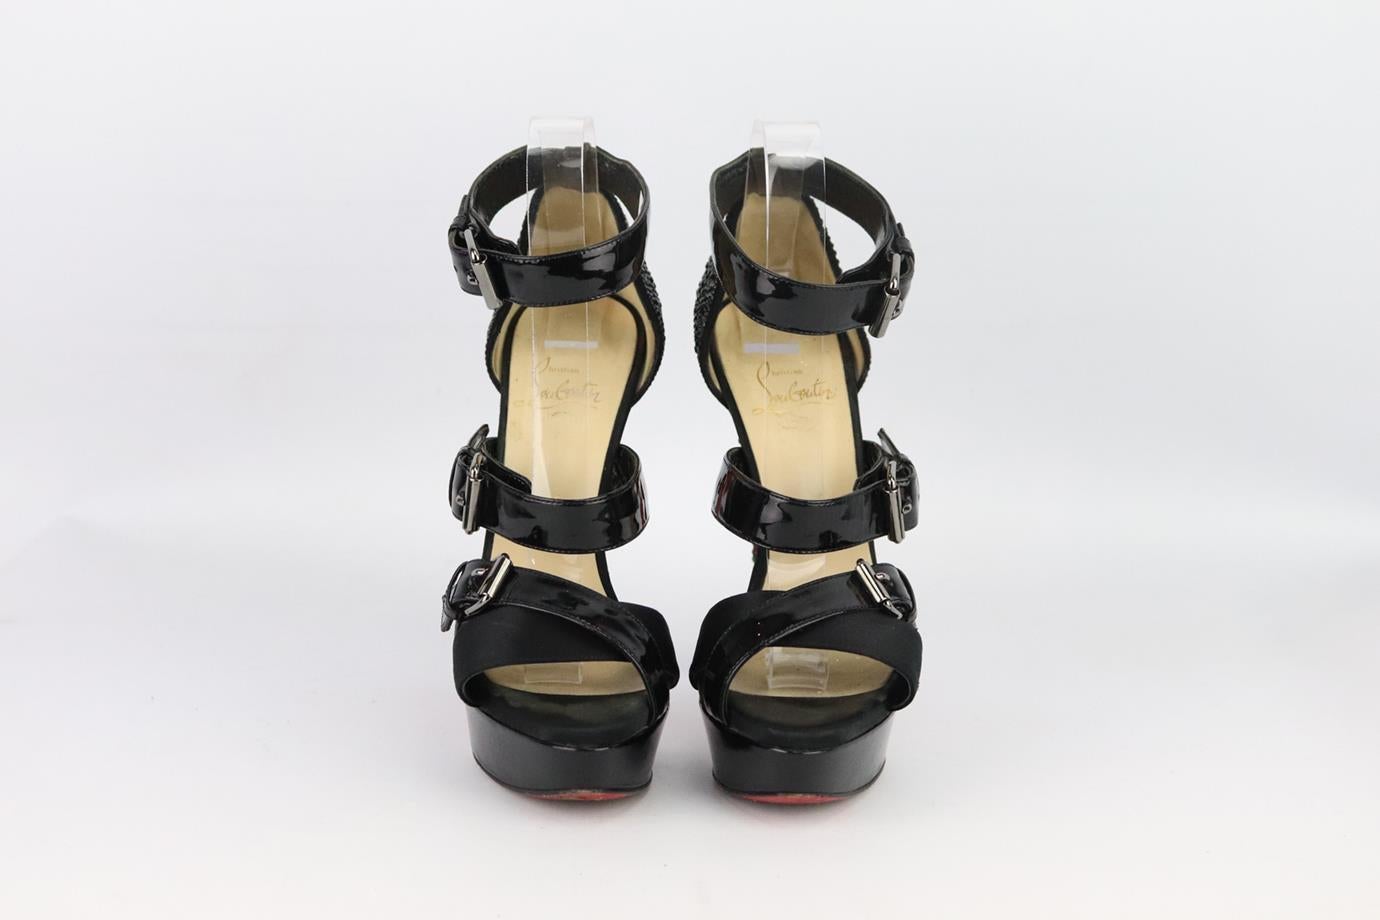 Christian Louboutin embellished patent leather platform sandals. Made from black patent leather and satin with crystal embellished heel with buckle detail and set on the brand’s iconic red sole. Black. Buckle fastening at side. Does not come with